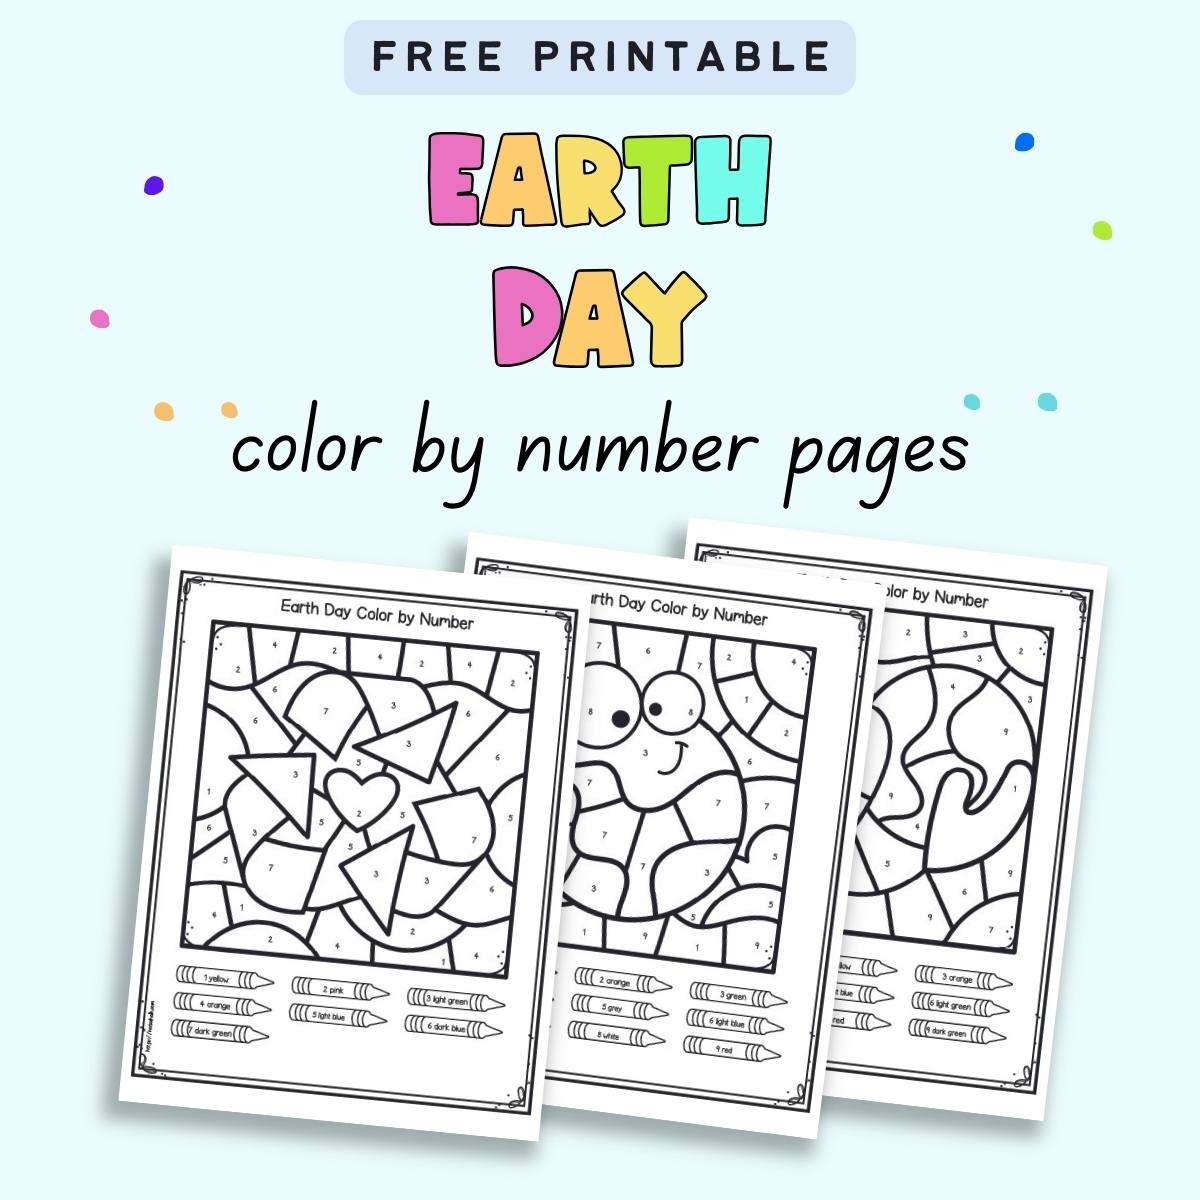 Text "free printable Earth Day color by number pages" with a preview of three color by number sheets